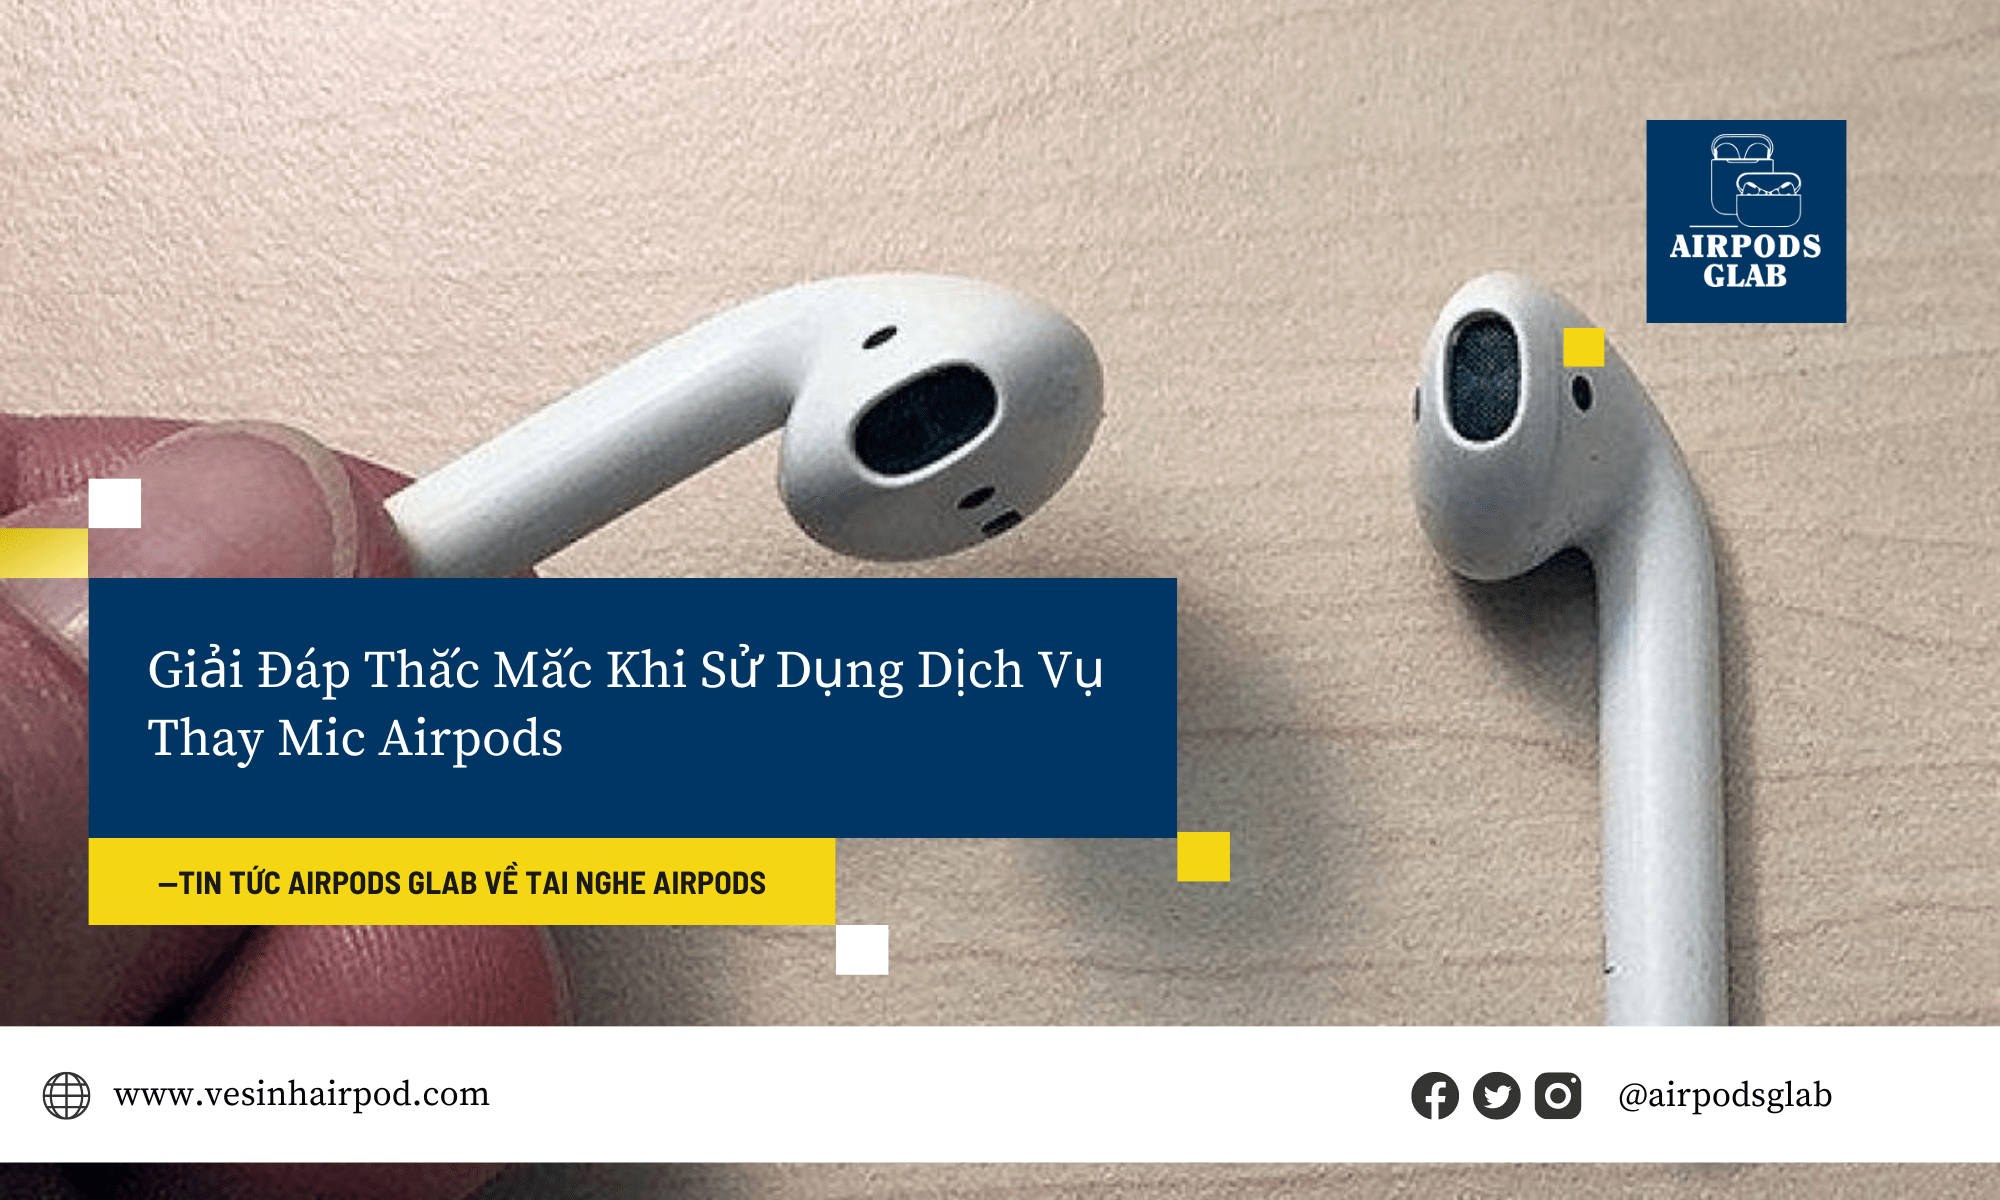 thay-mic-airpods-1